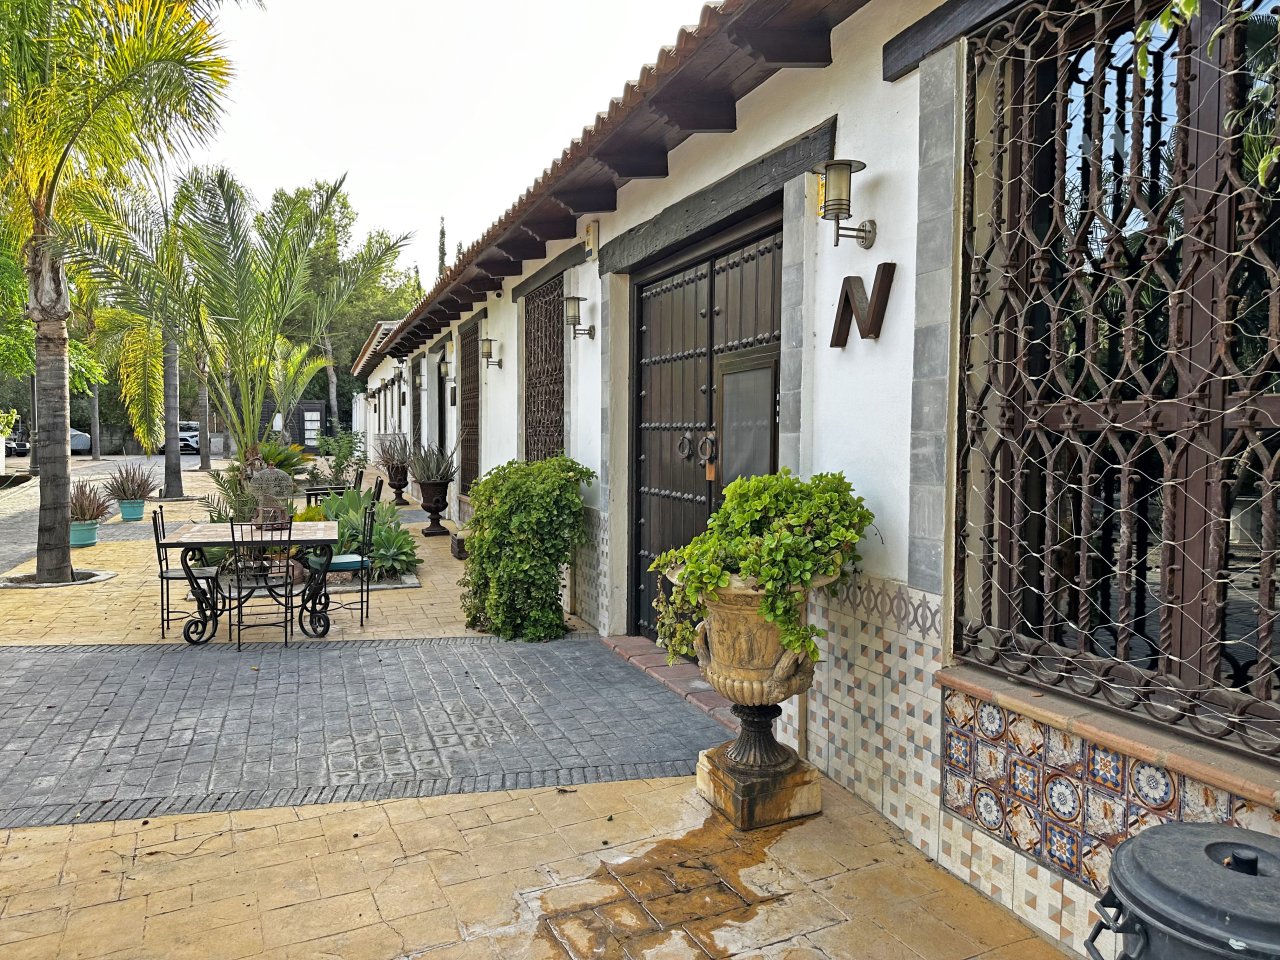 2344 Andalusia, Malaga, riding centre, stables for sale